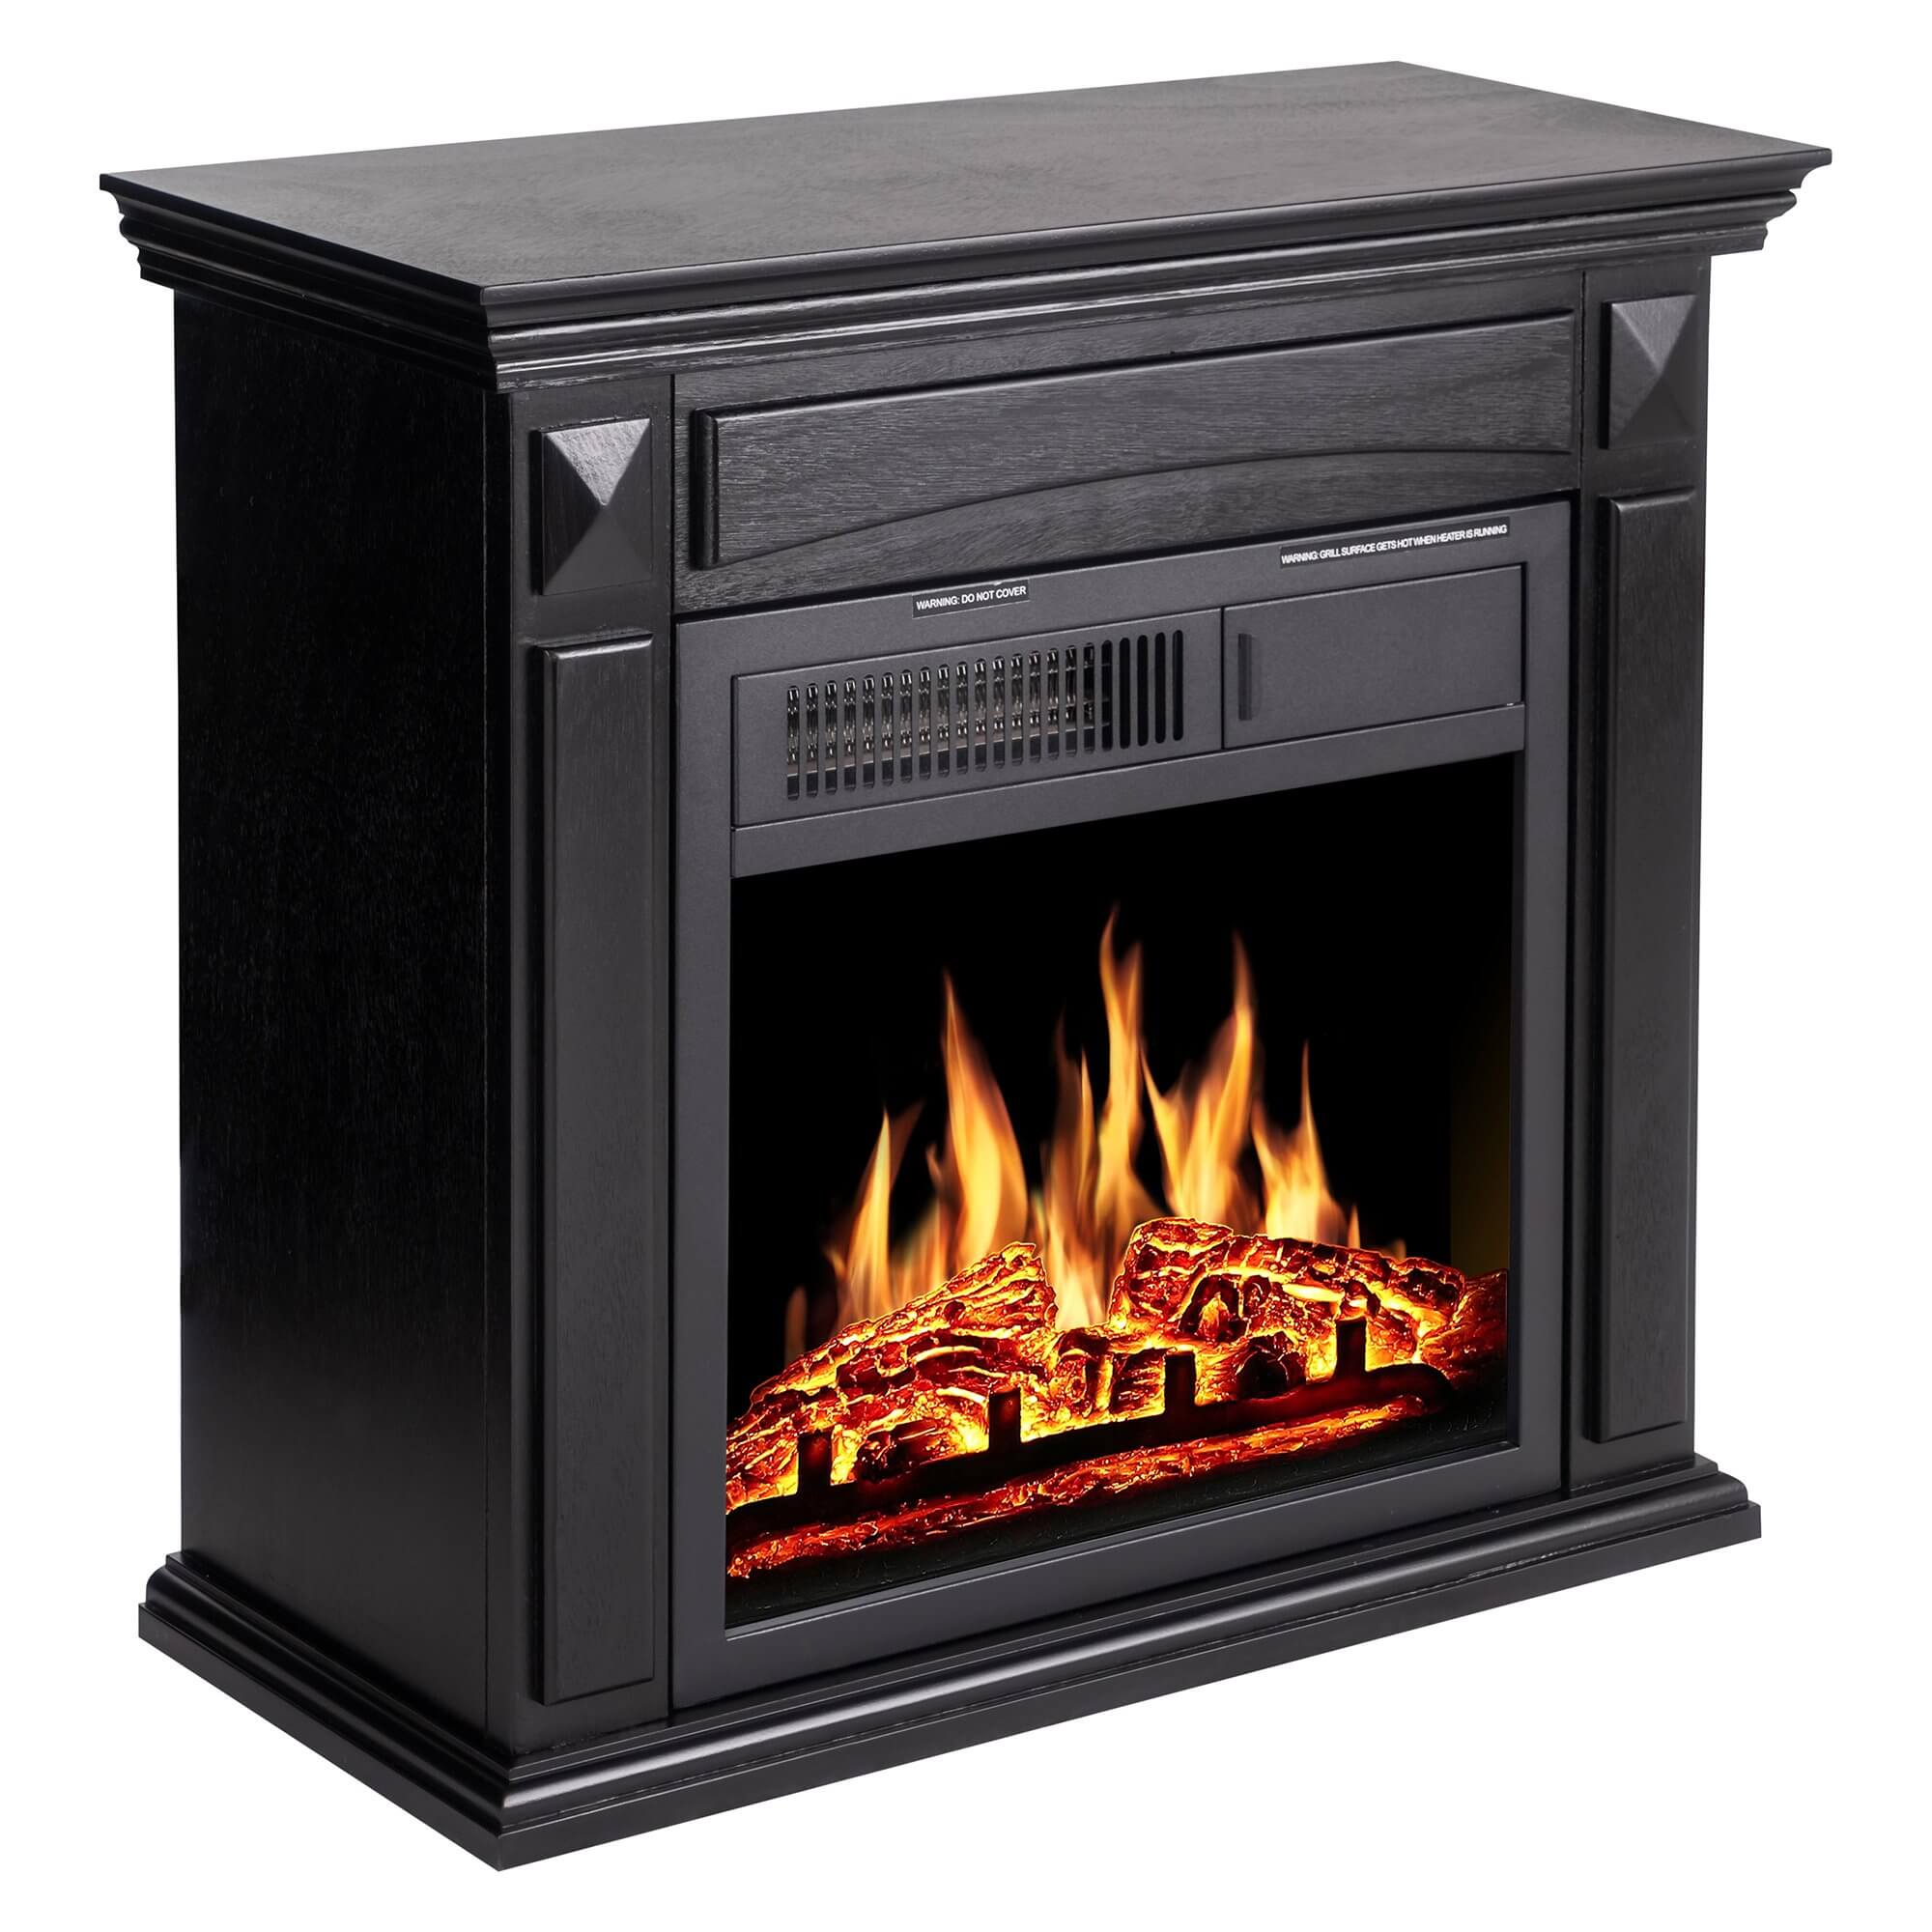 R.W.FLAME  27" Electric Fireplace Mantel Wooden Surround  Firebox ,Remote Control